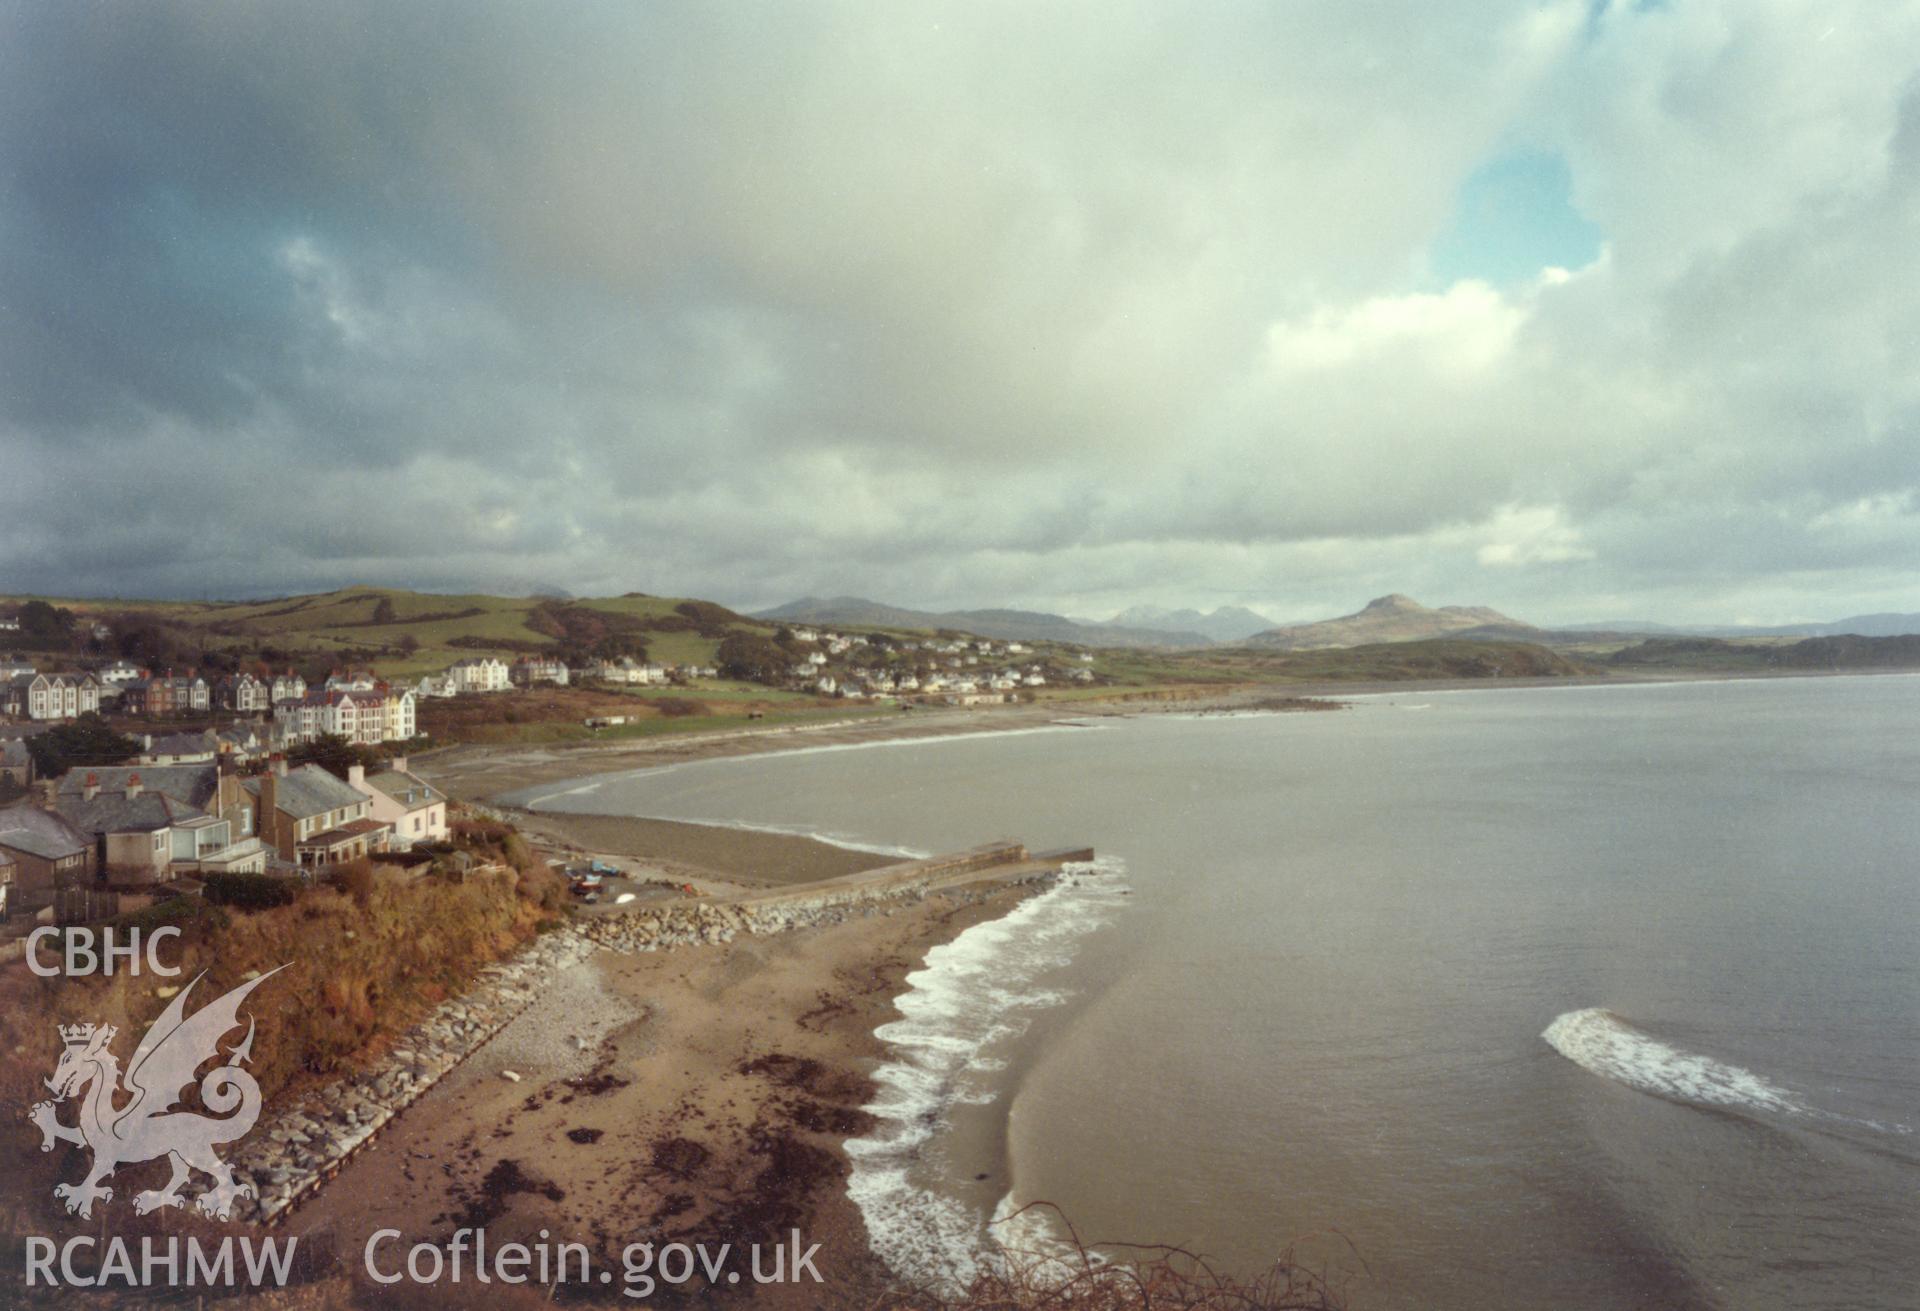 Aerial view of Criccieth Castle and the coast, from the Central Office of Information.